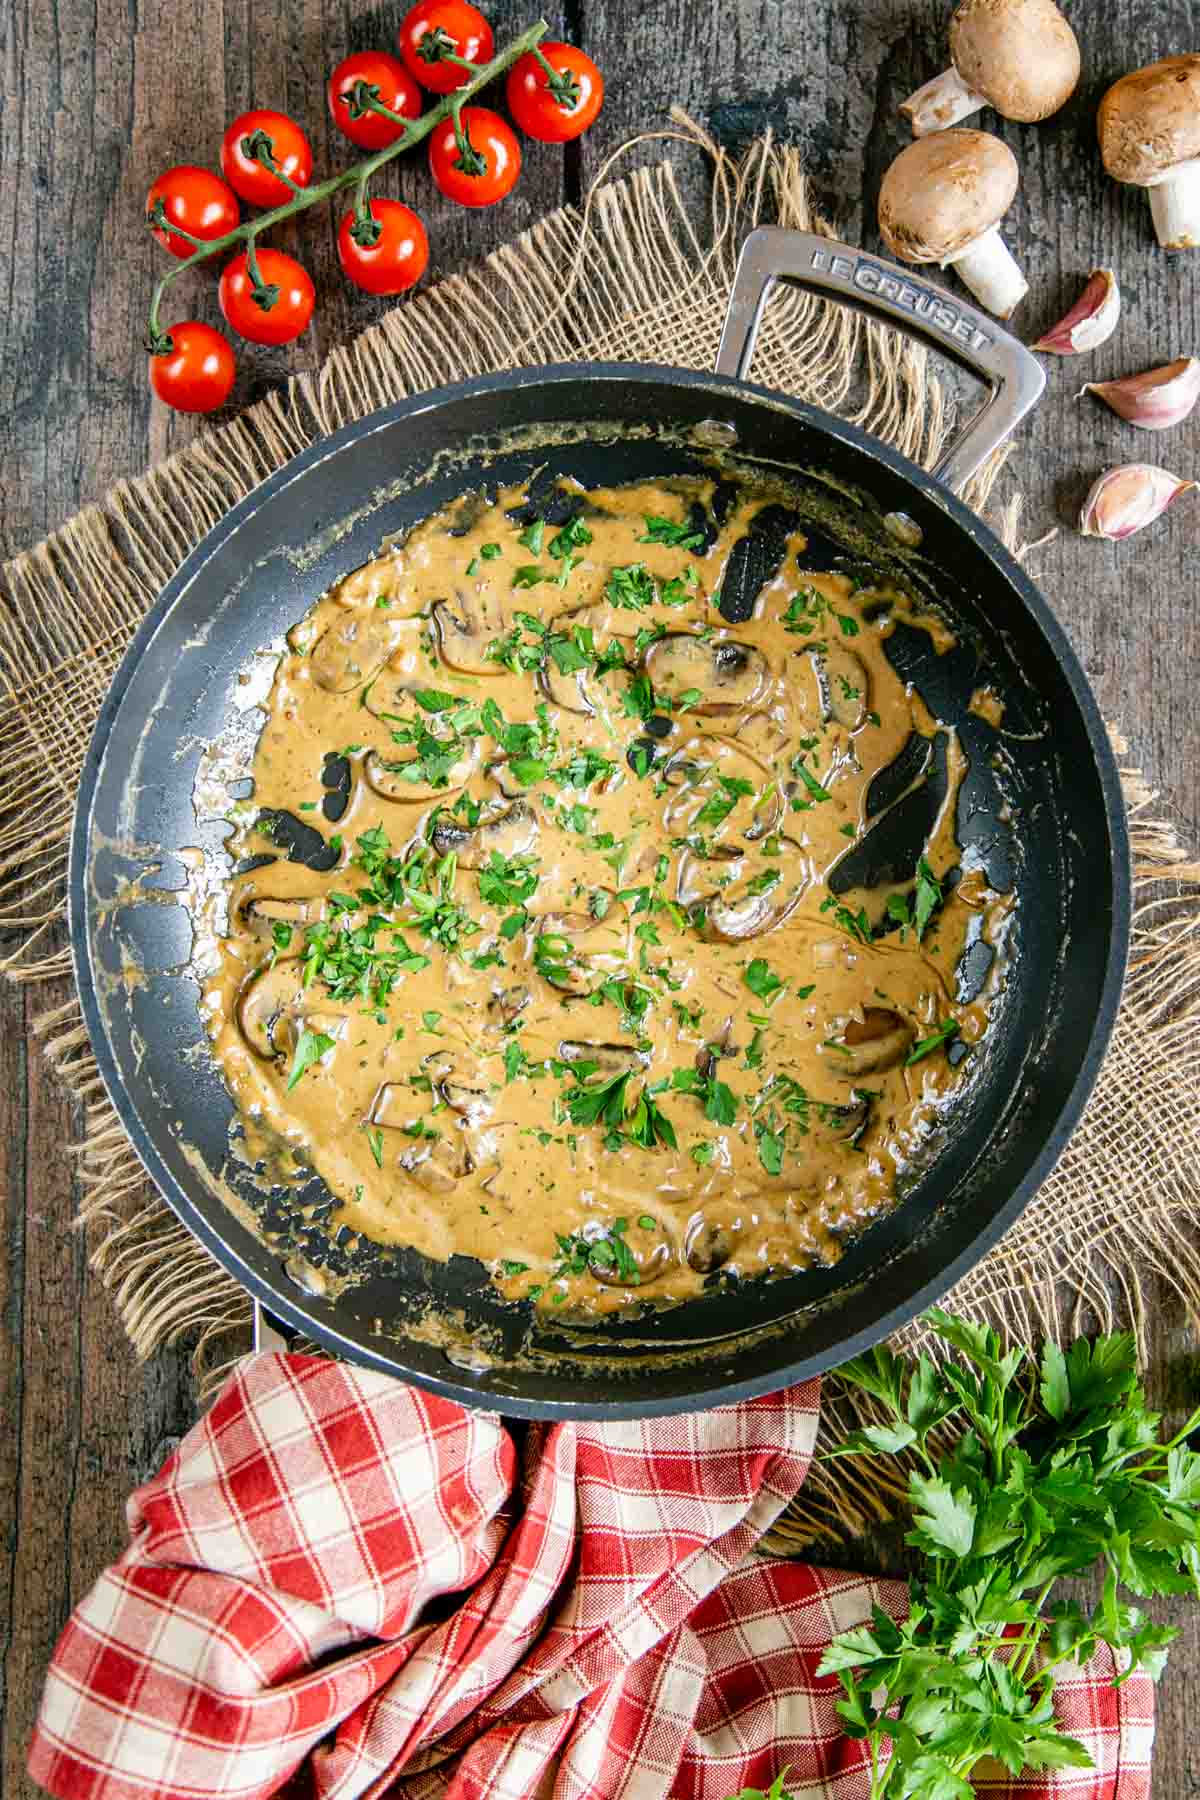 Rich creamy and golden, this Diane sauce is served with a little parsley stirred in and a sprinkling on top for contrast.